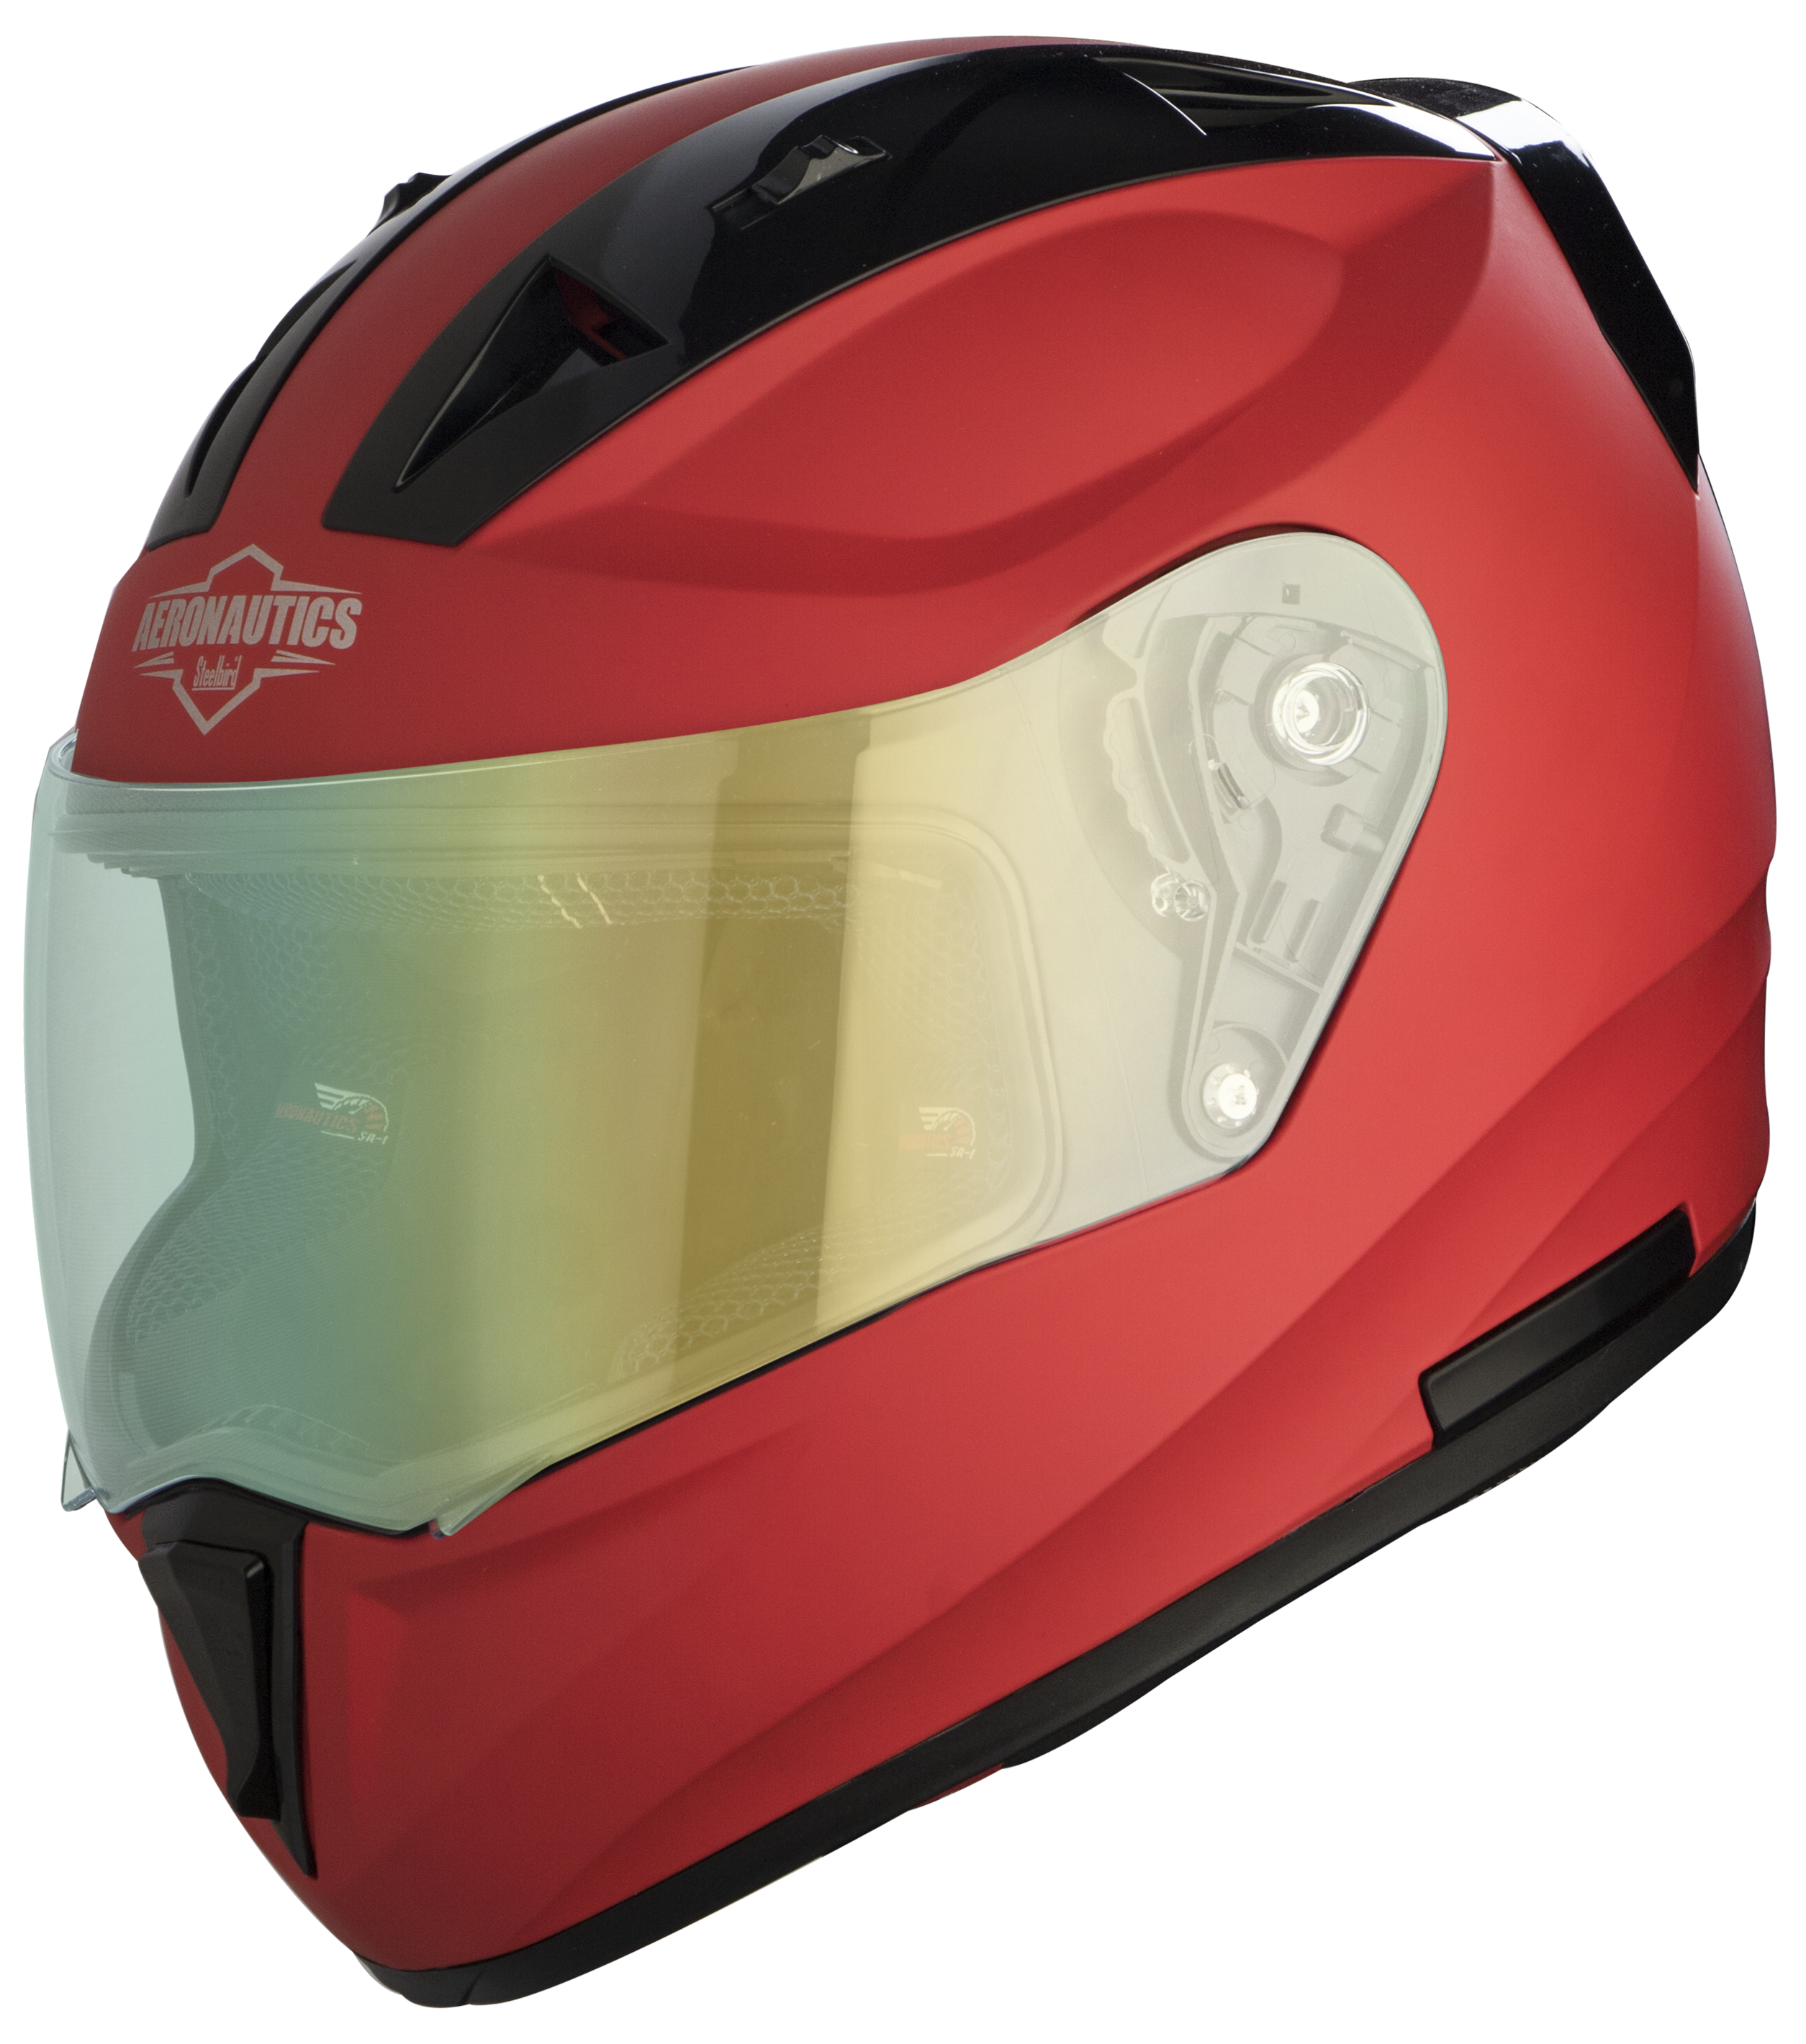 SA-1 Aeronautics Mat Sports Red (Fitted With Clear Visor Extra Green Night Vision Visor Free)